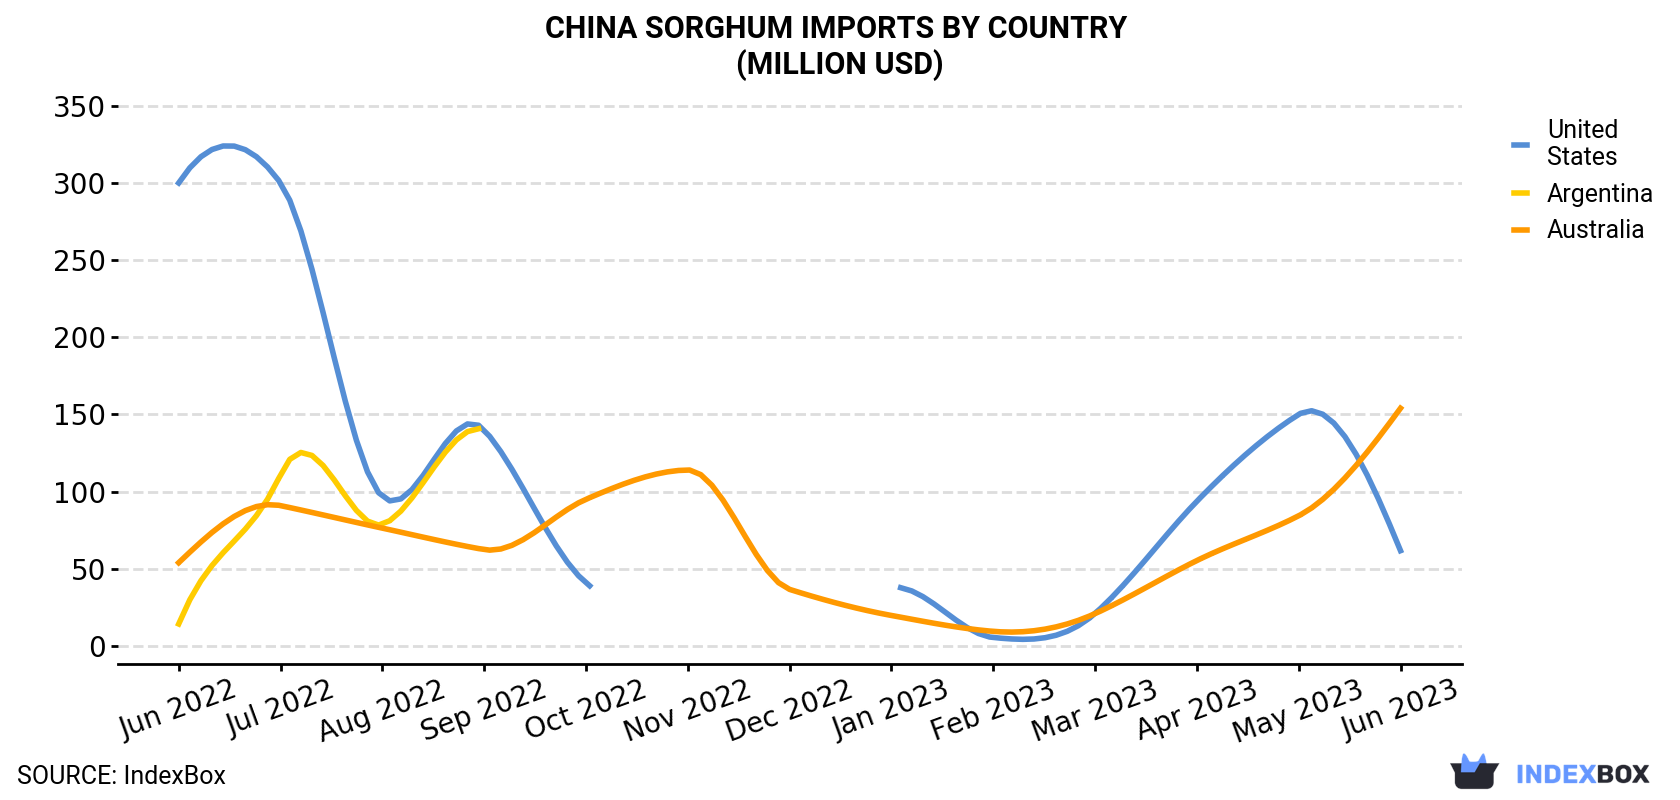 China Sorghum Imports By Country (Million USD)